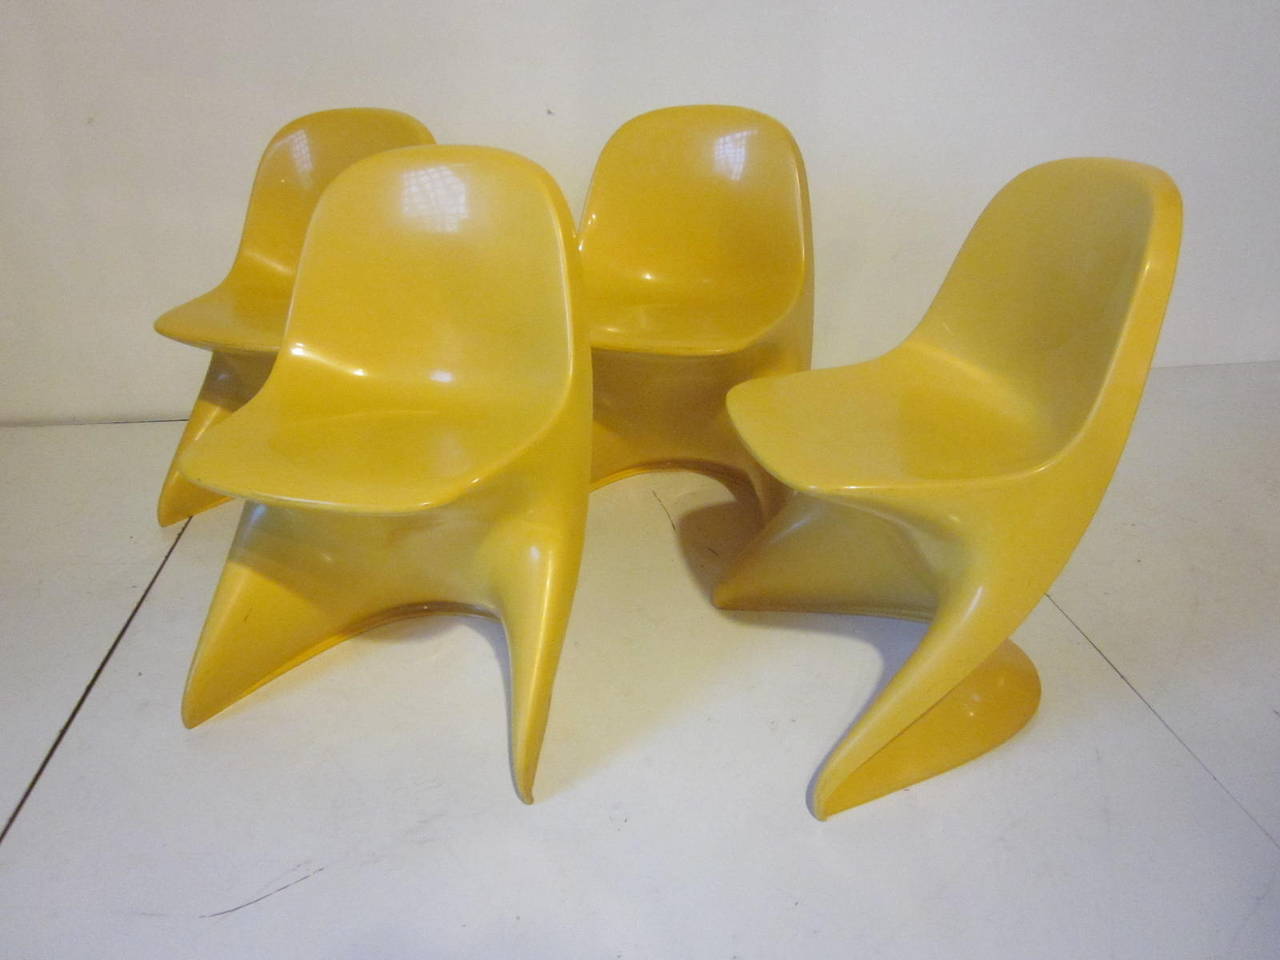 Casalino one bright yellow ABS plastic molded children's chairs that are stackable and cleanable. Makes the perfect modern addition to the kids play area or bedroom. Only two available .